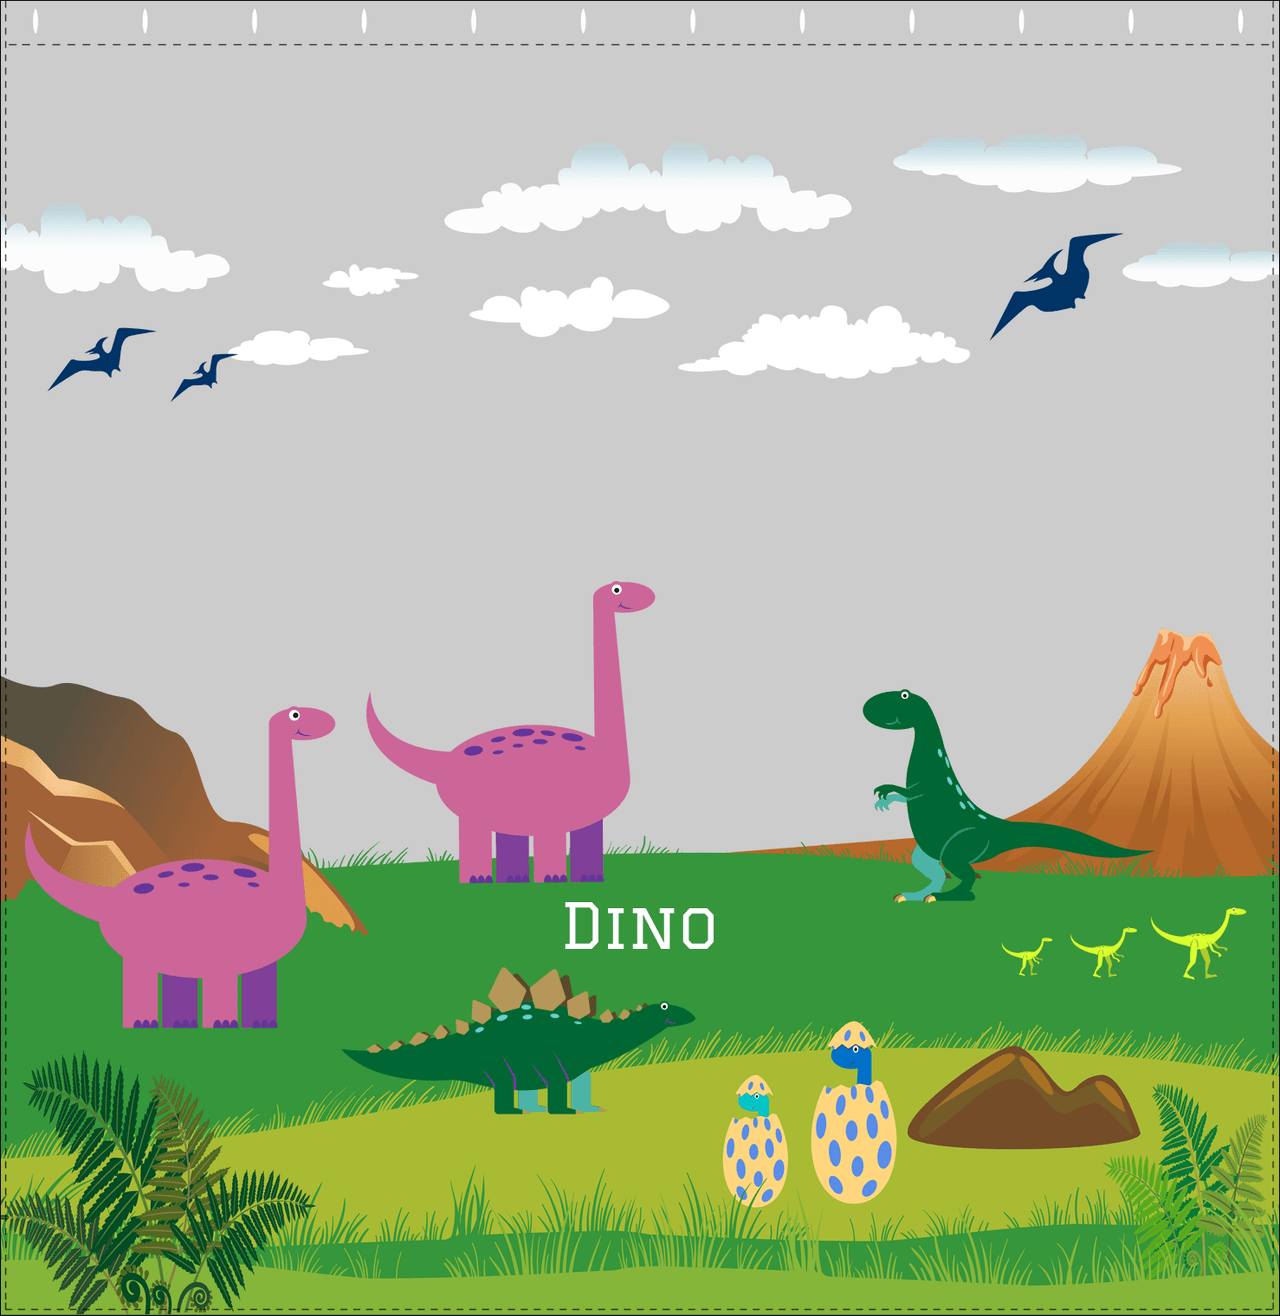 Personalized Dinosaur Shower Curtain IV - Grey Background - Dormant Volcano - Decorate View